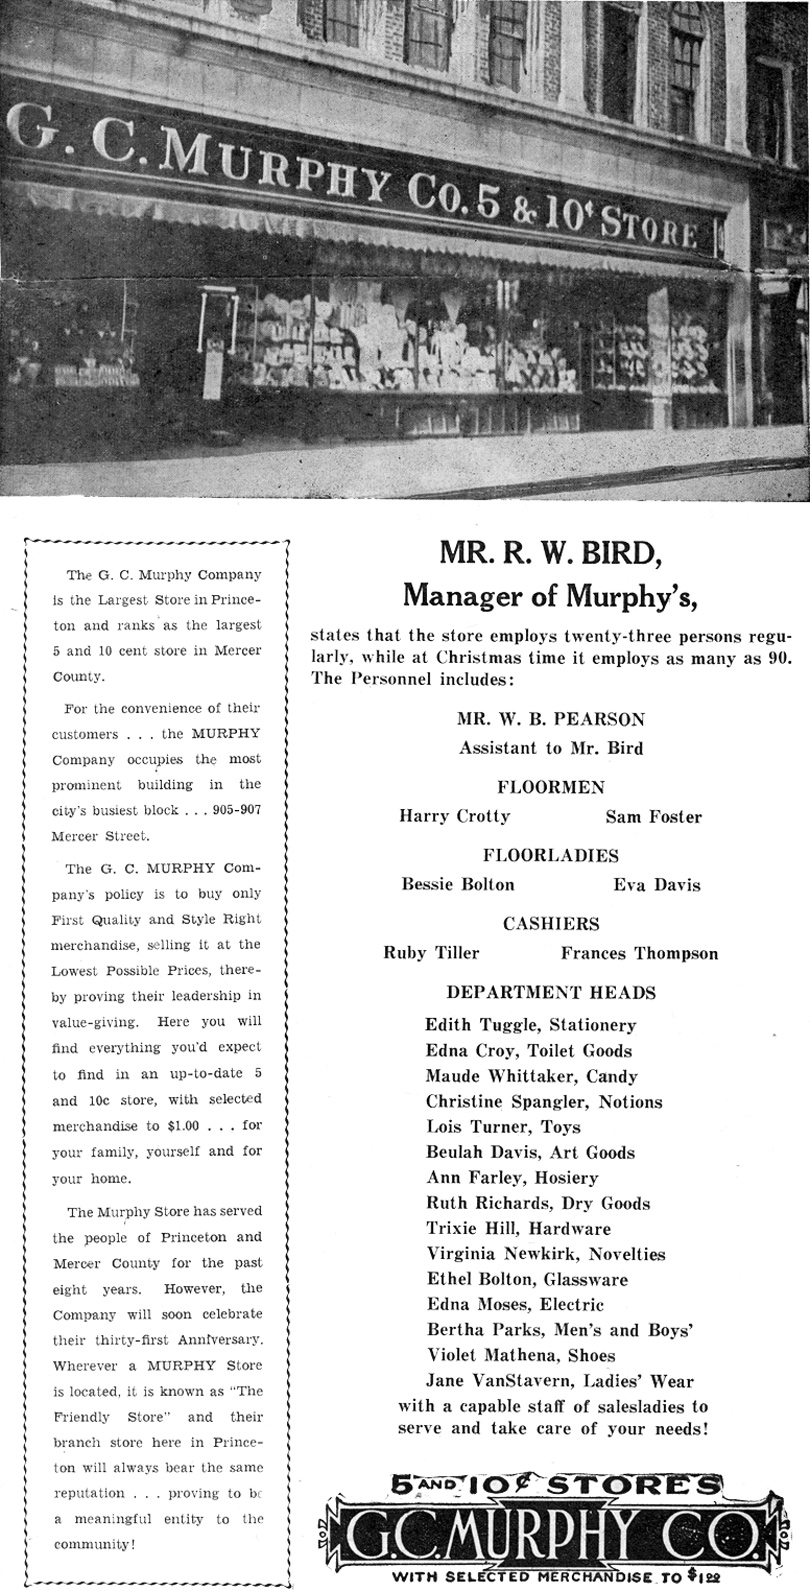 G. C. Mrphy Company Advertisement on August 5, 1937